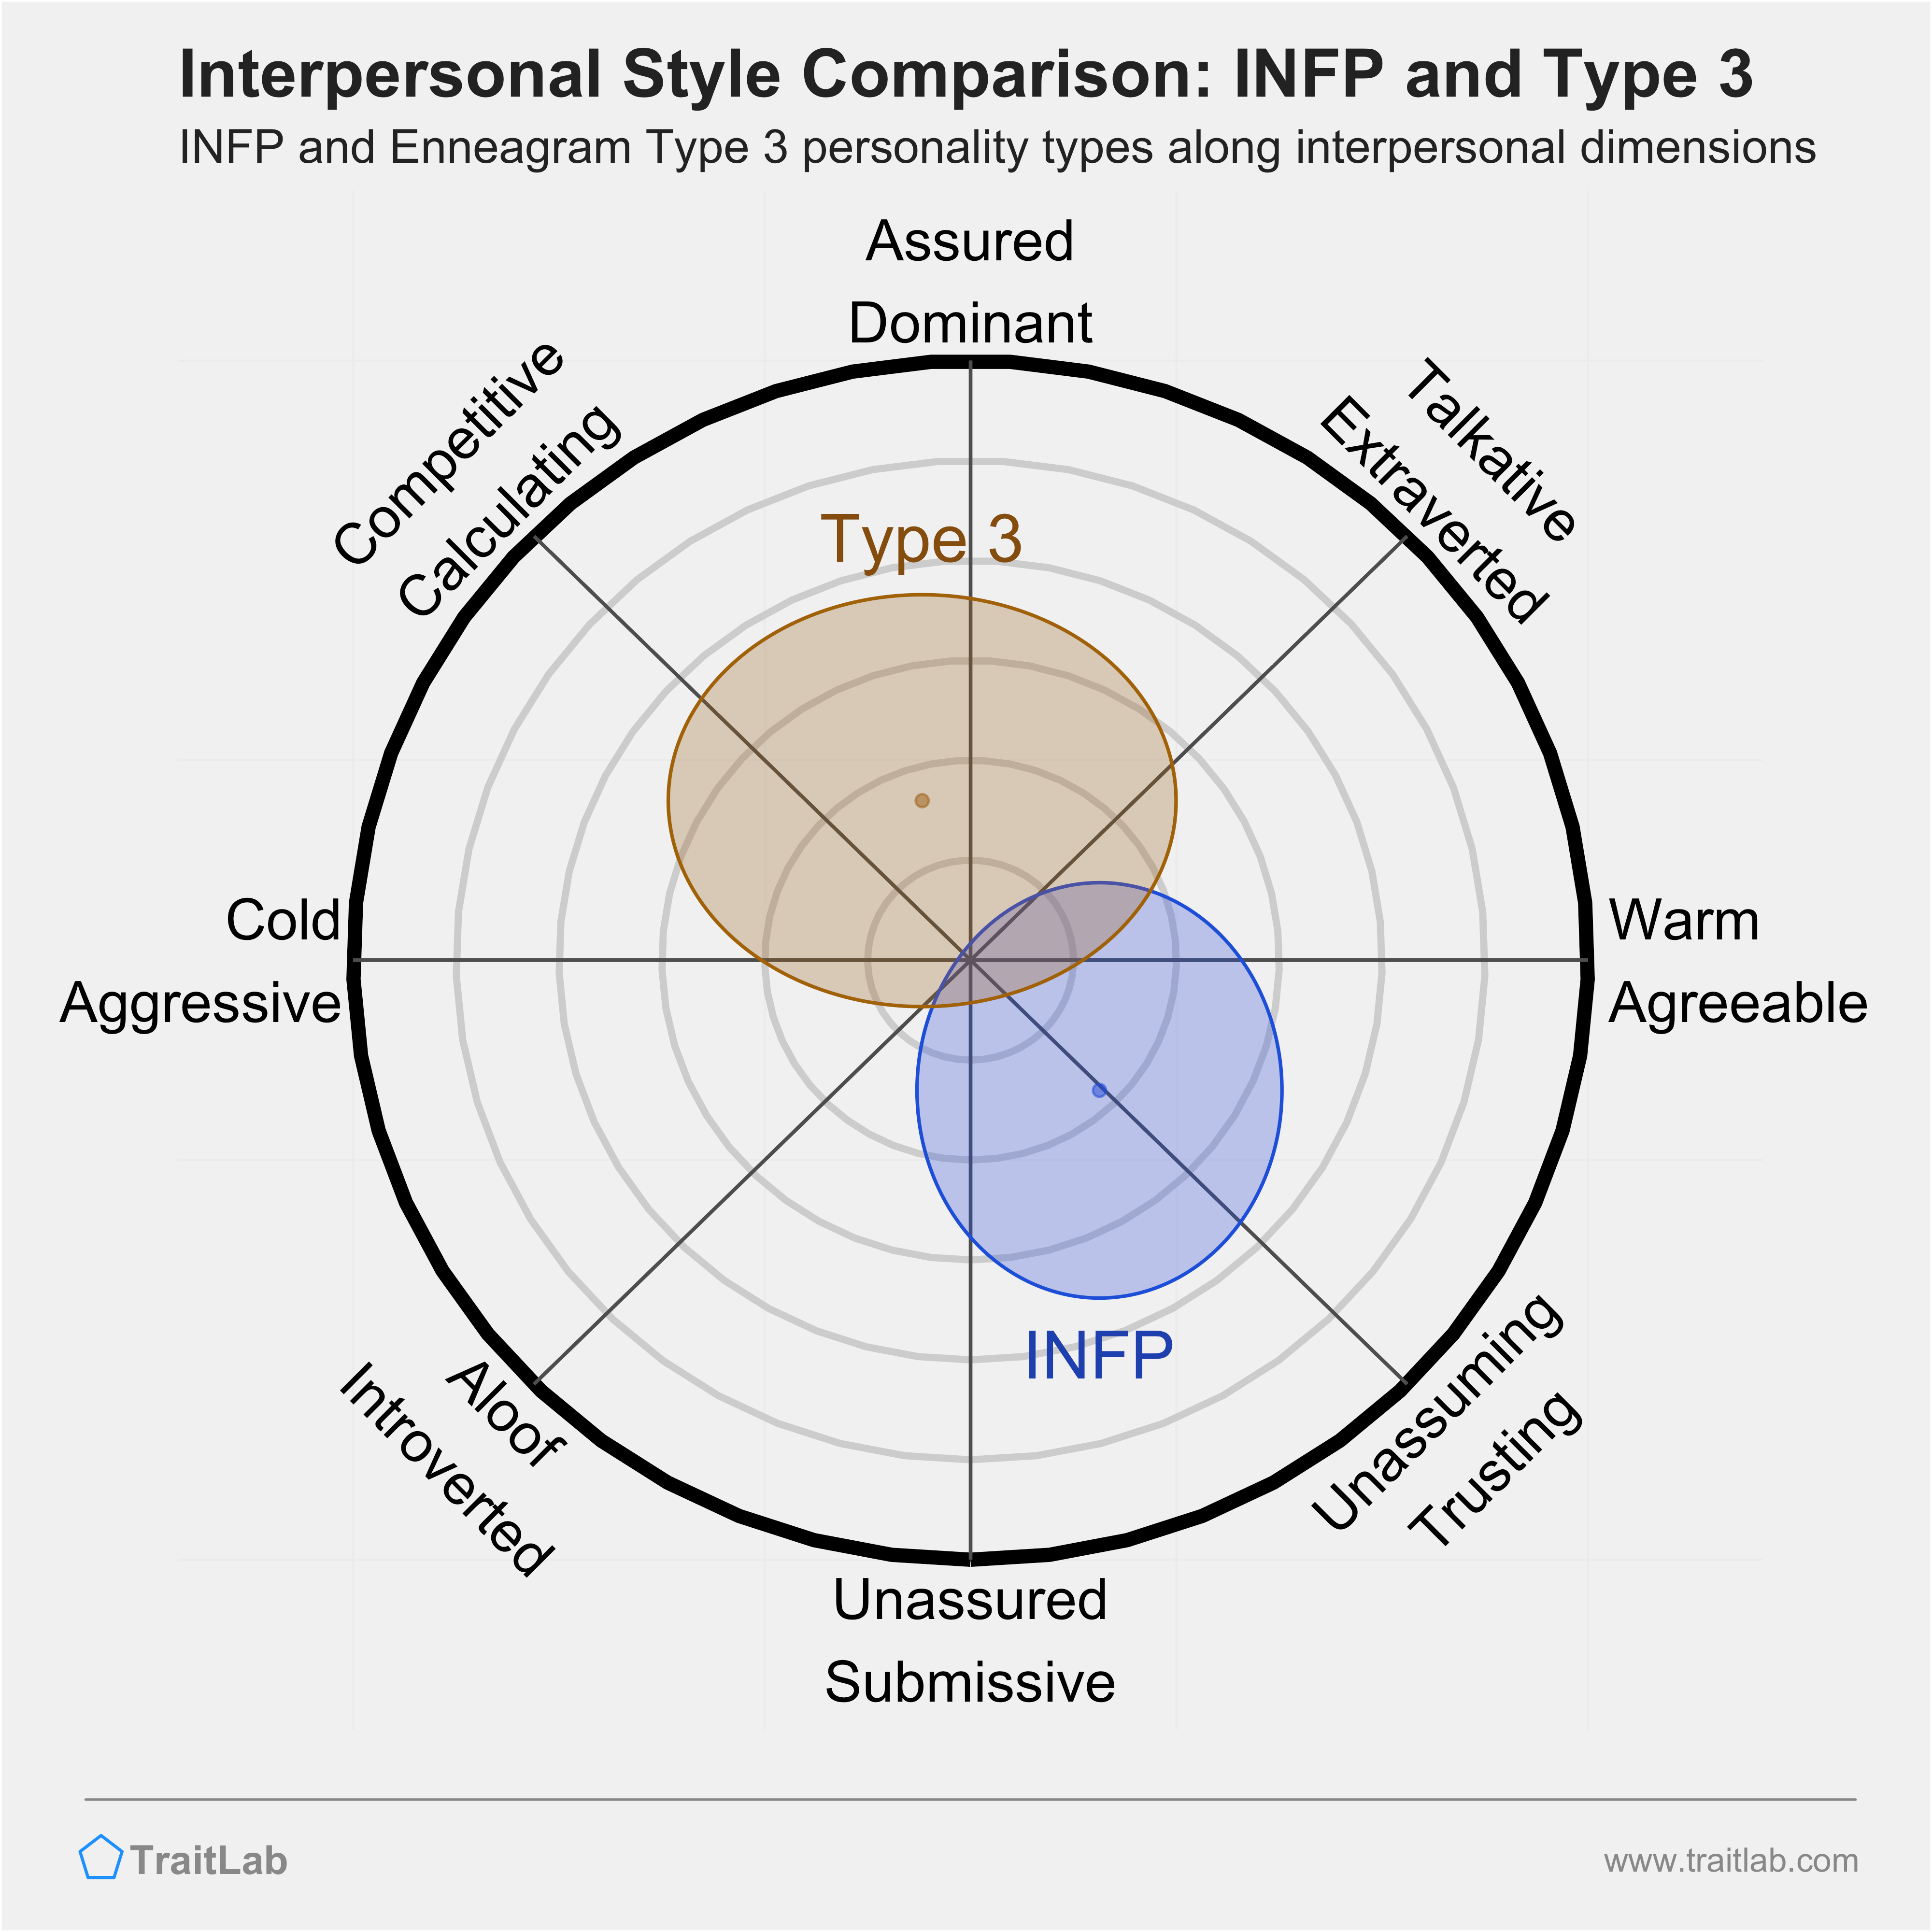 Enneagram INFP and Type 3 comparison across interpersonal dimensions